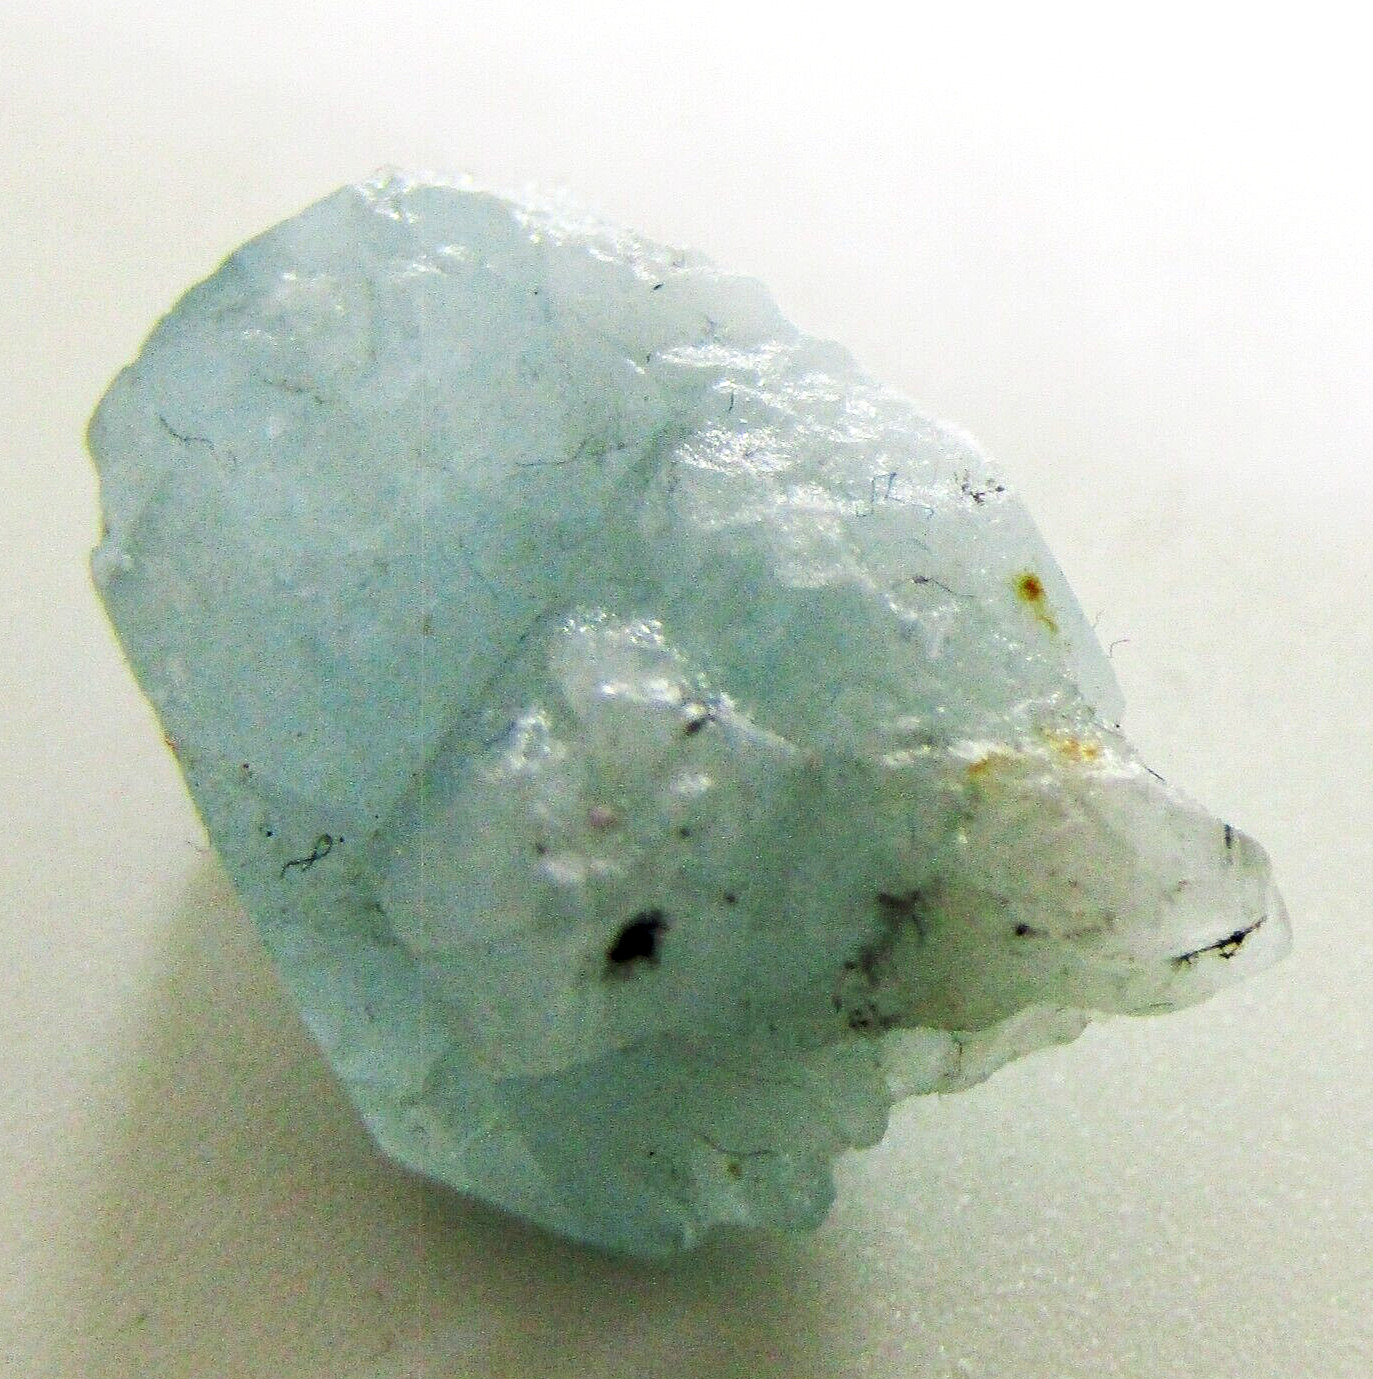 Euclase Gem Crystal From Gachala Colombia - @ 15 Carats